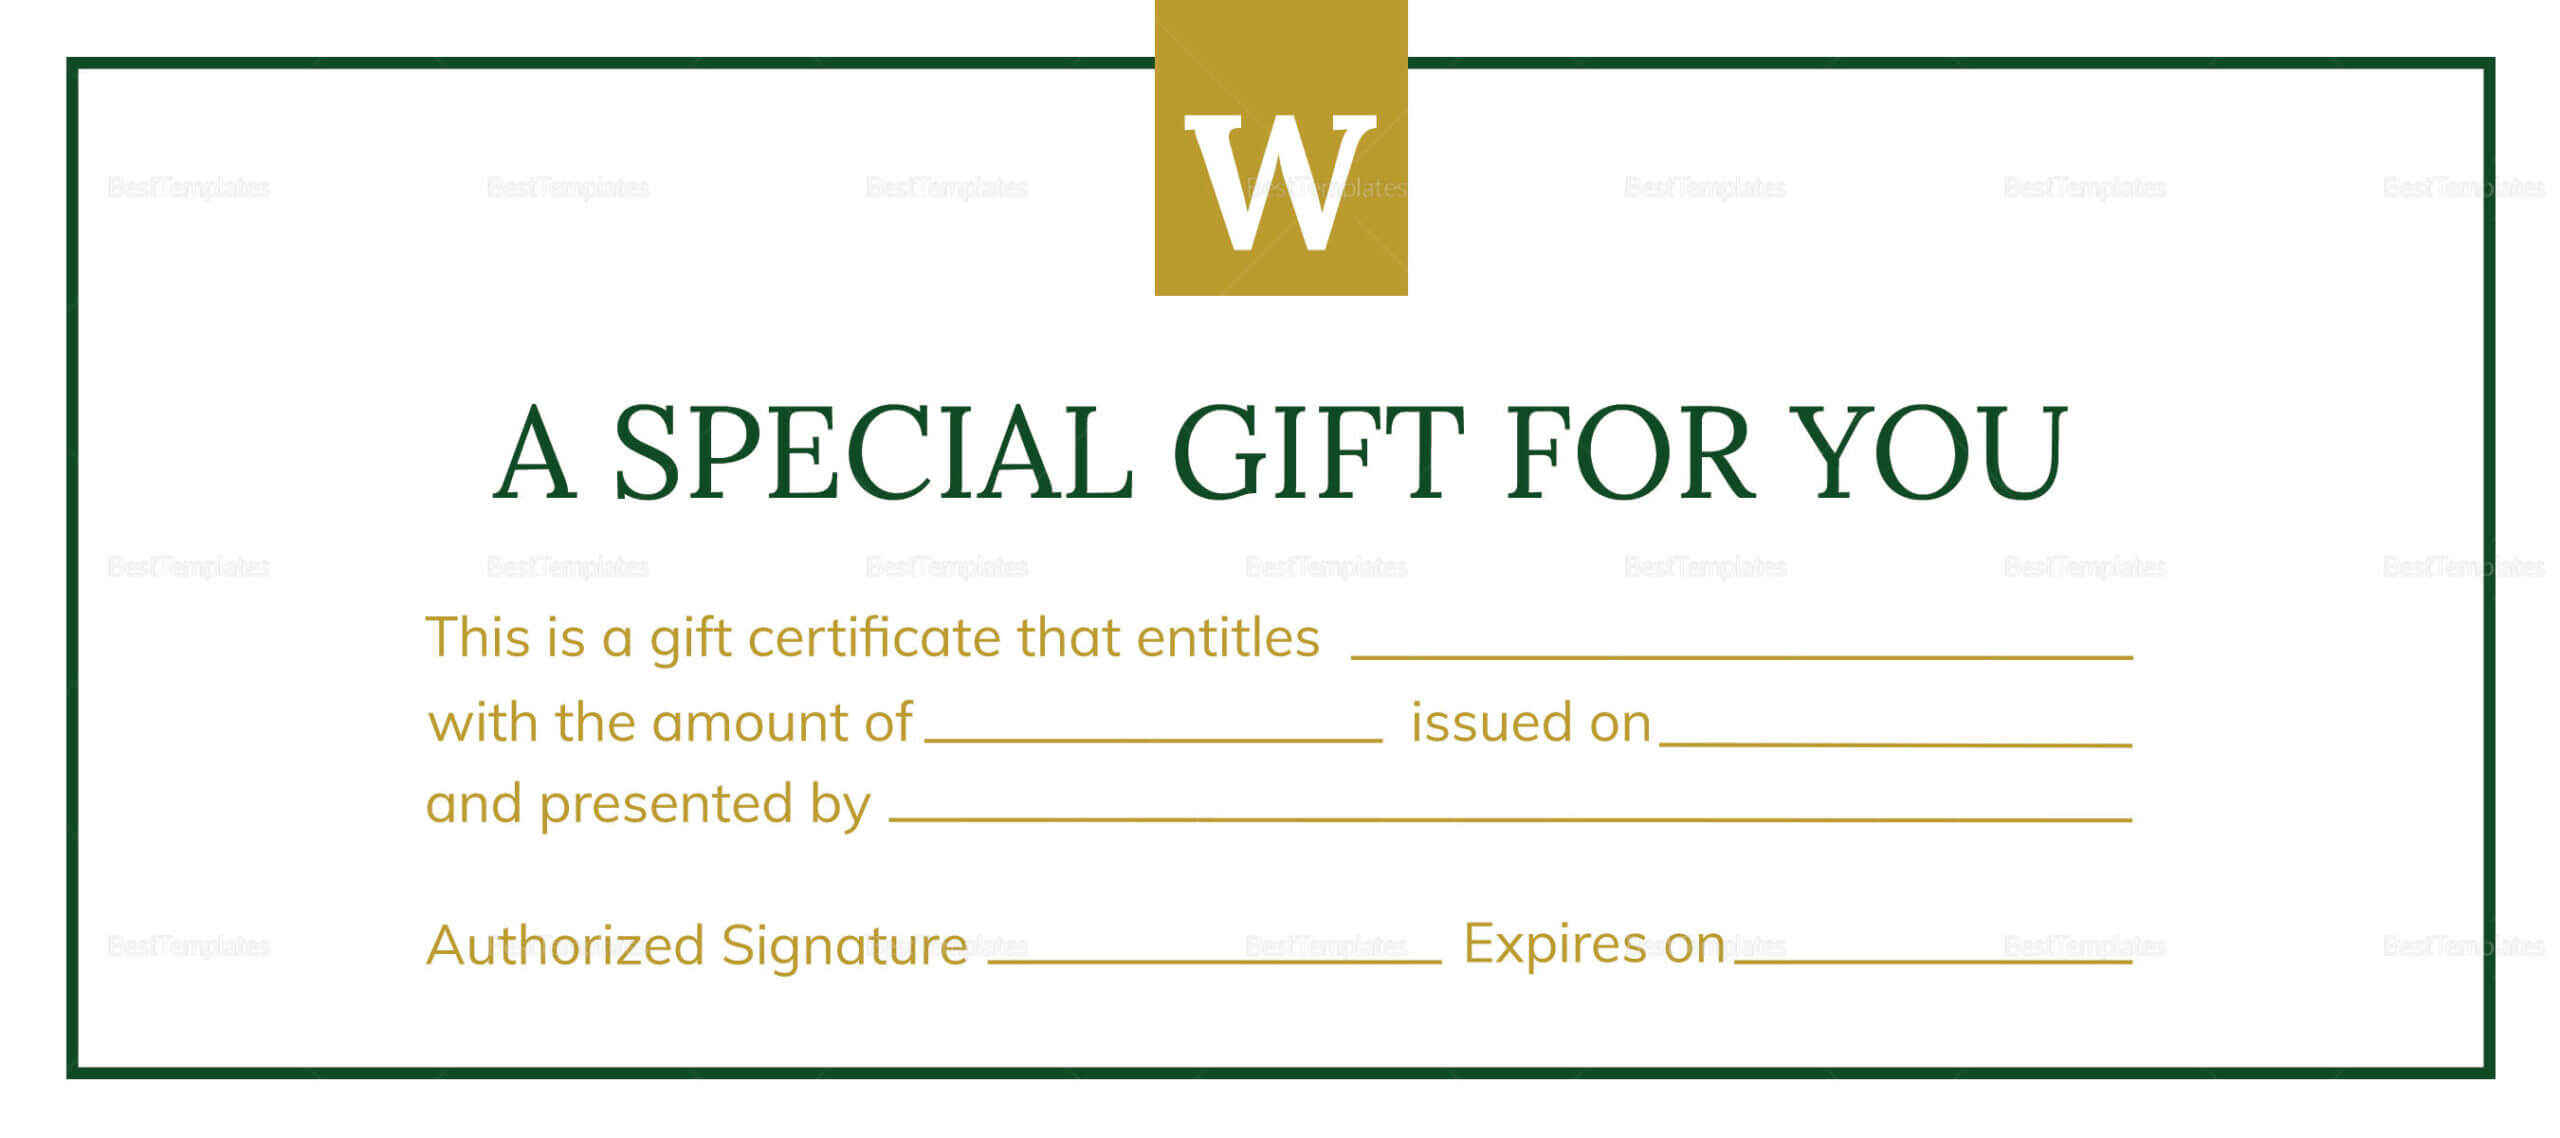 Hotel Gift Certificate Template Intended For Publisher Gift Certificate Template